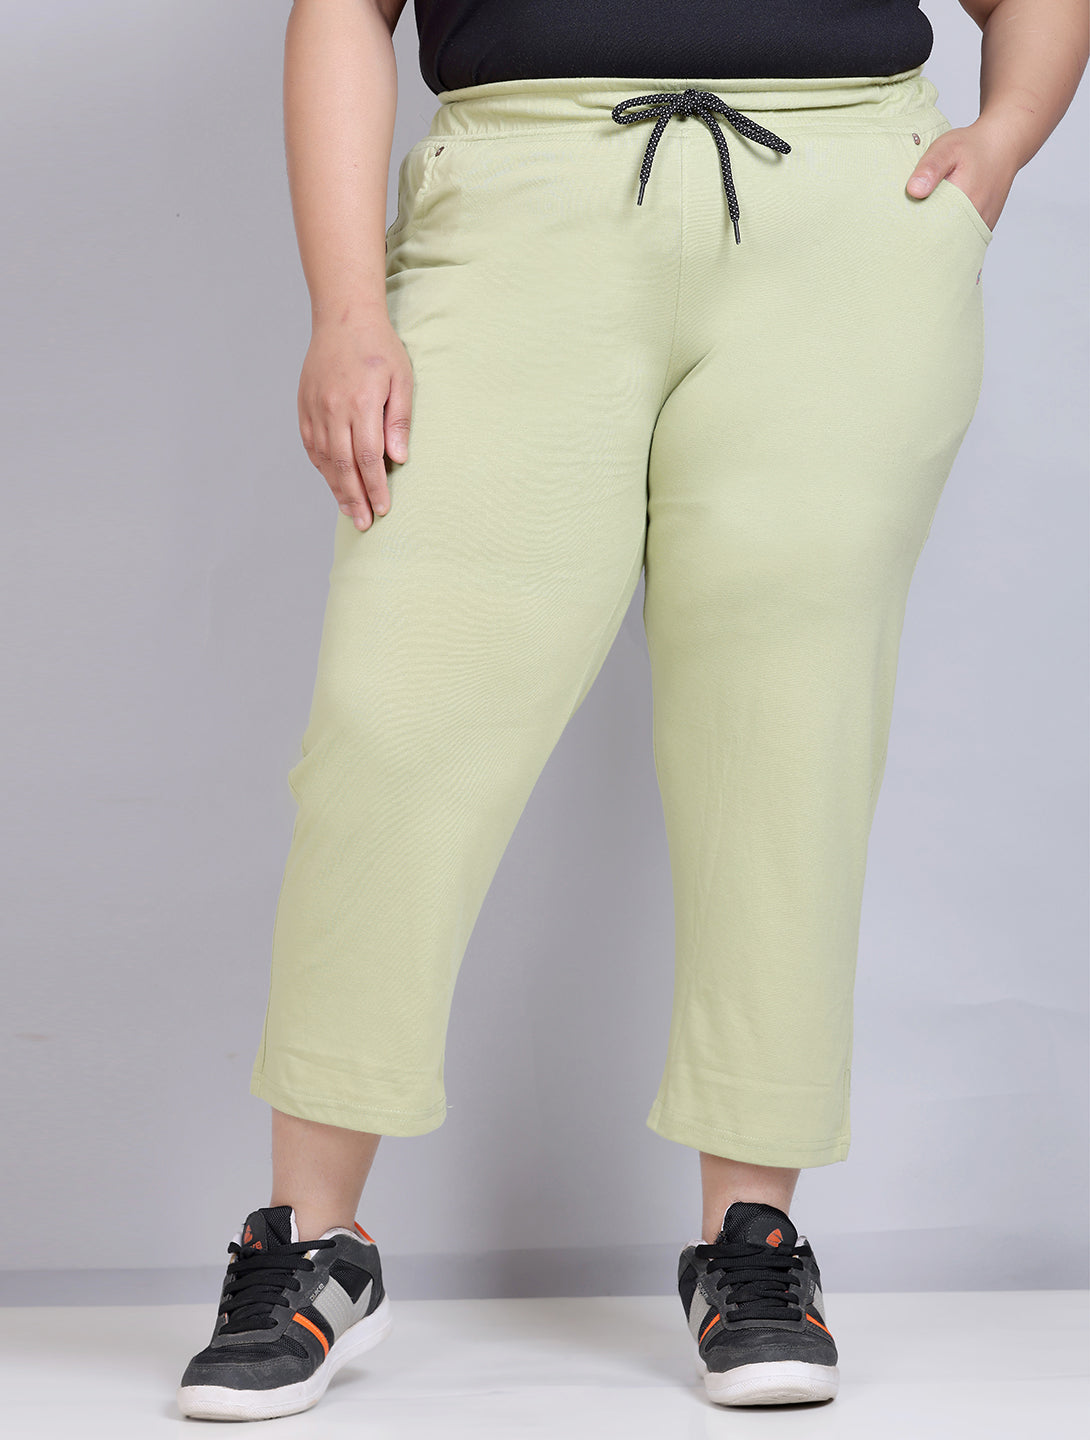 Plus Size Womens Capri 34th Leggings with Pocket  Stretch Fit